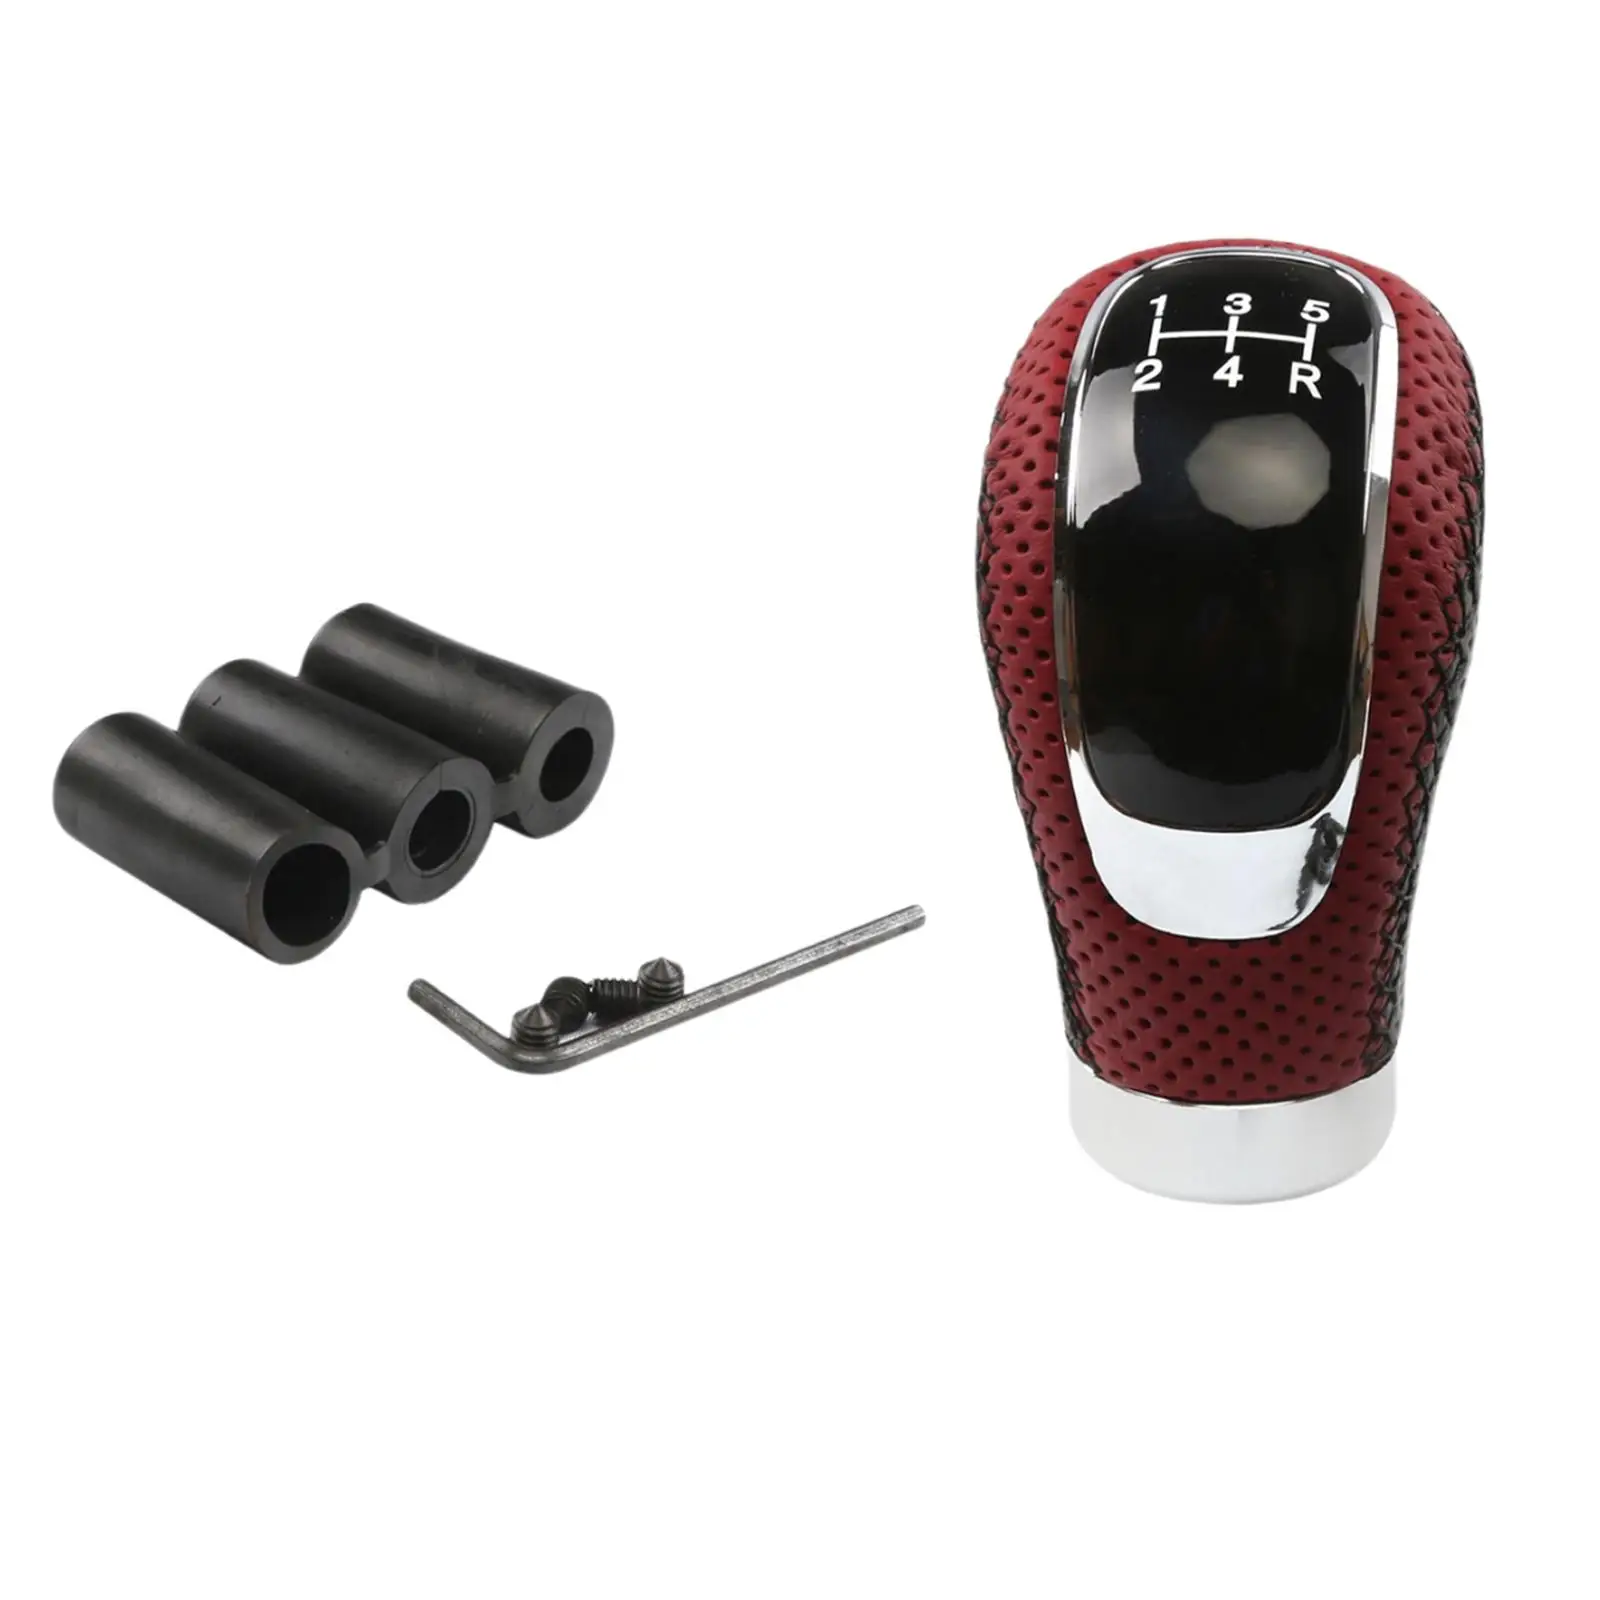 5 Speed Manual Gear Shift Knob Aluminum Alloy Accessories Shifting Handle for Cars